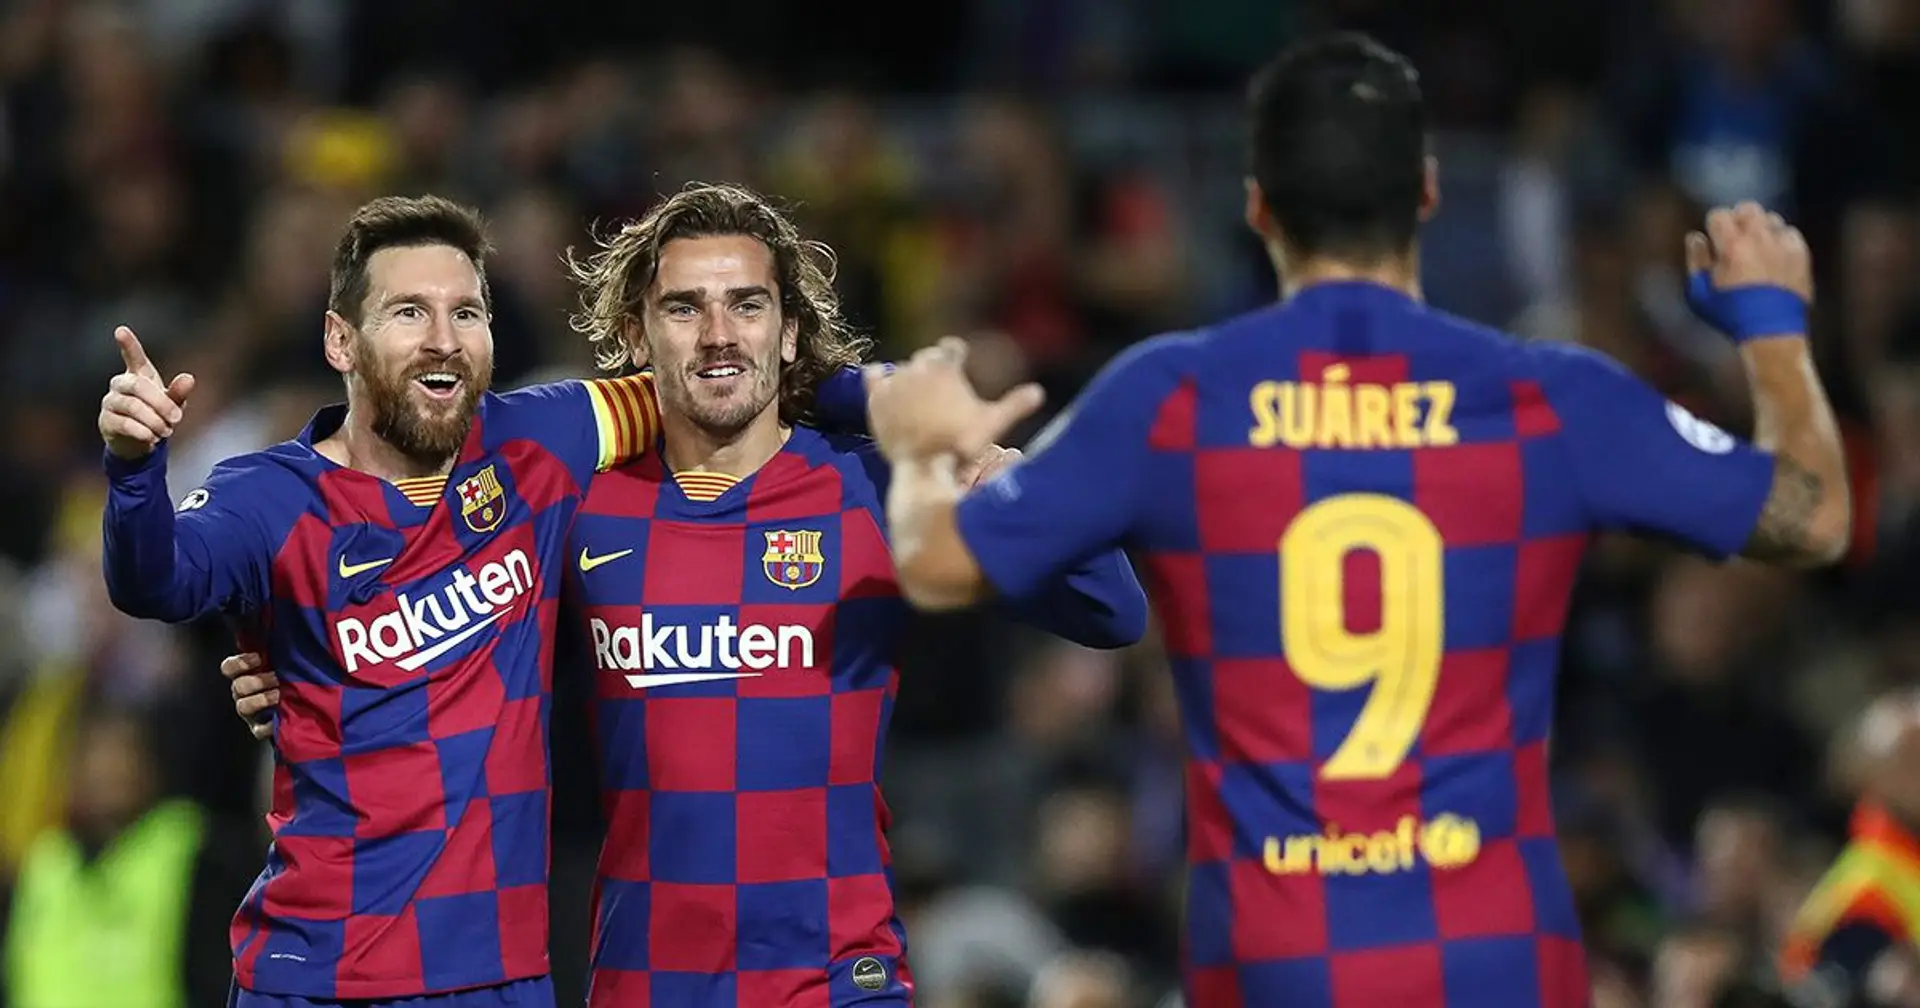 Explained: Why Suarez's exit could spark new life into Messi-Griezmann link-up